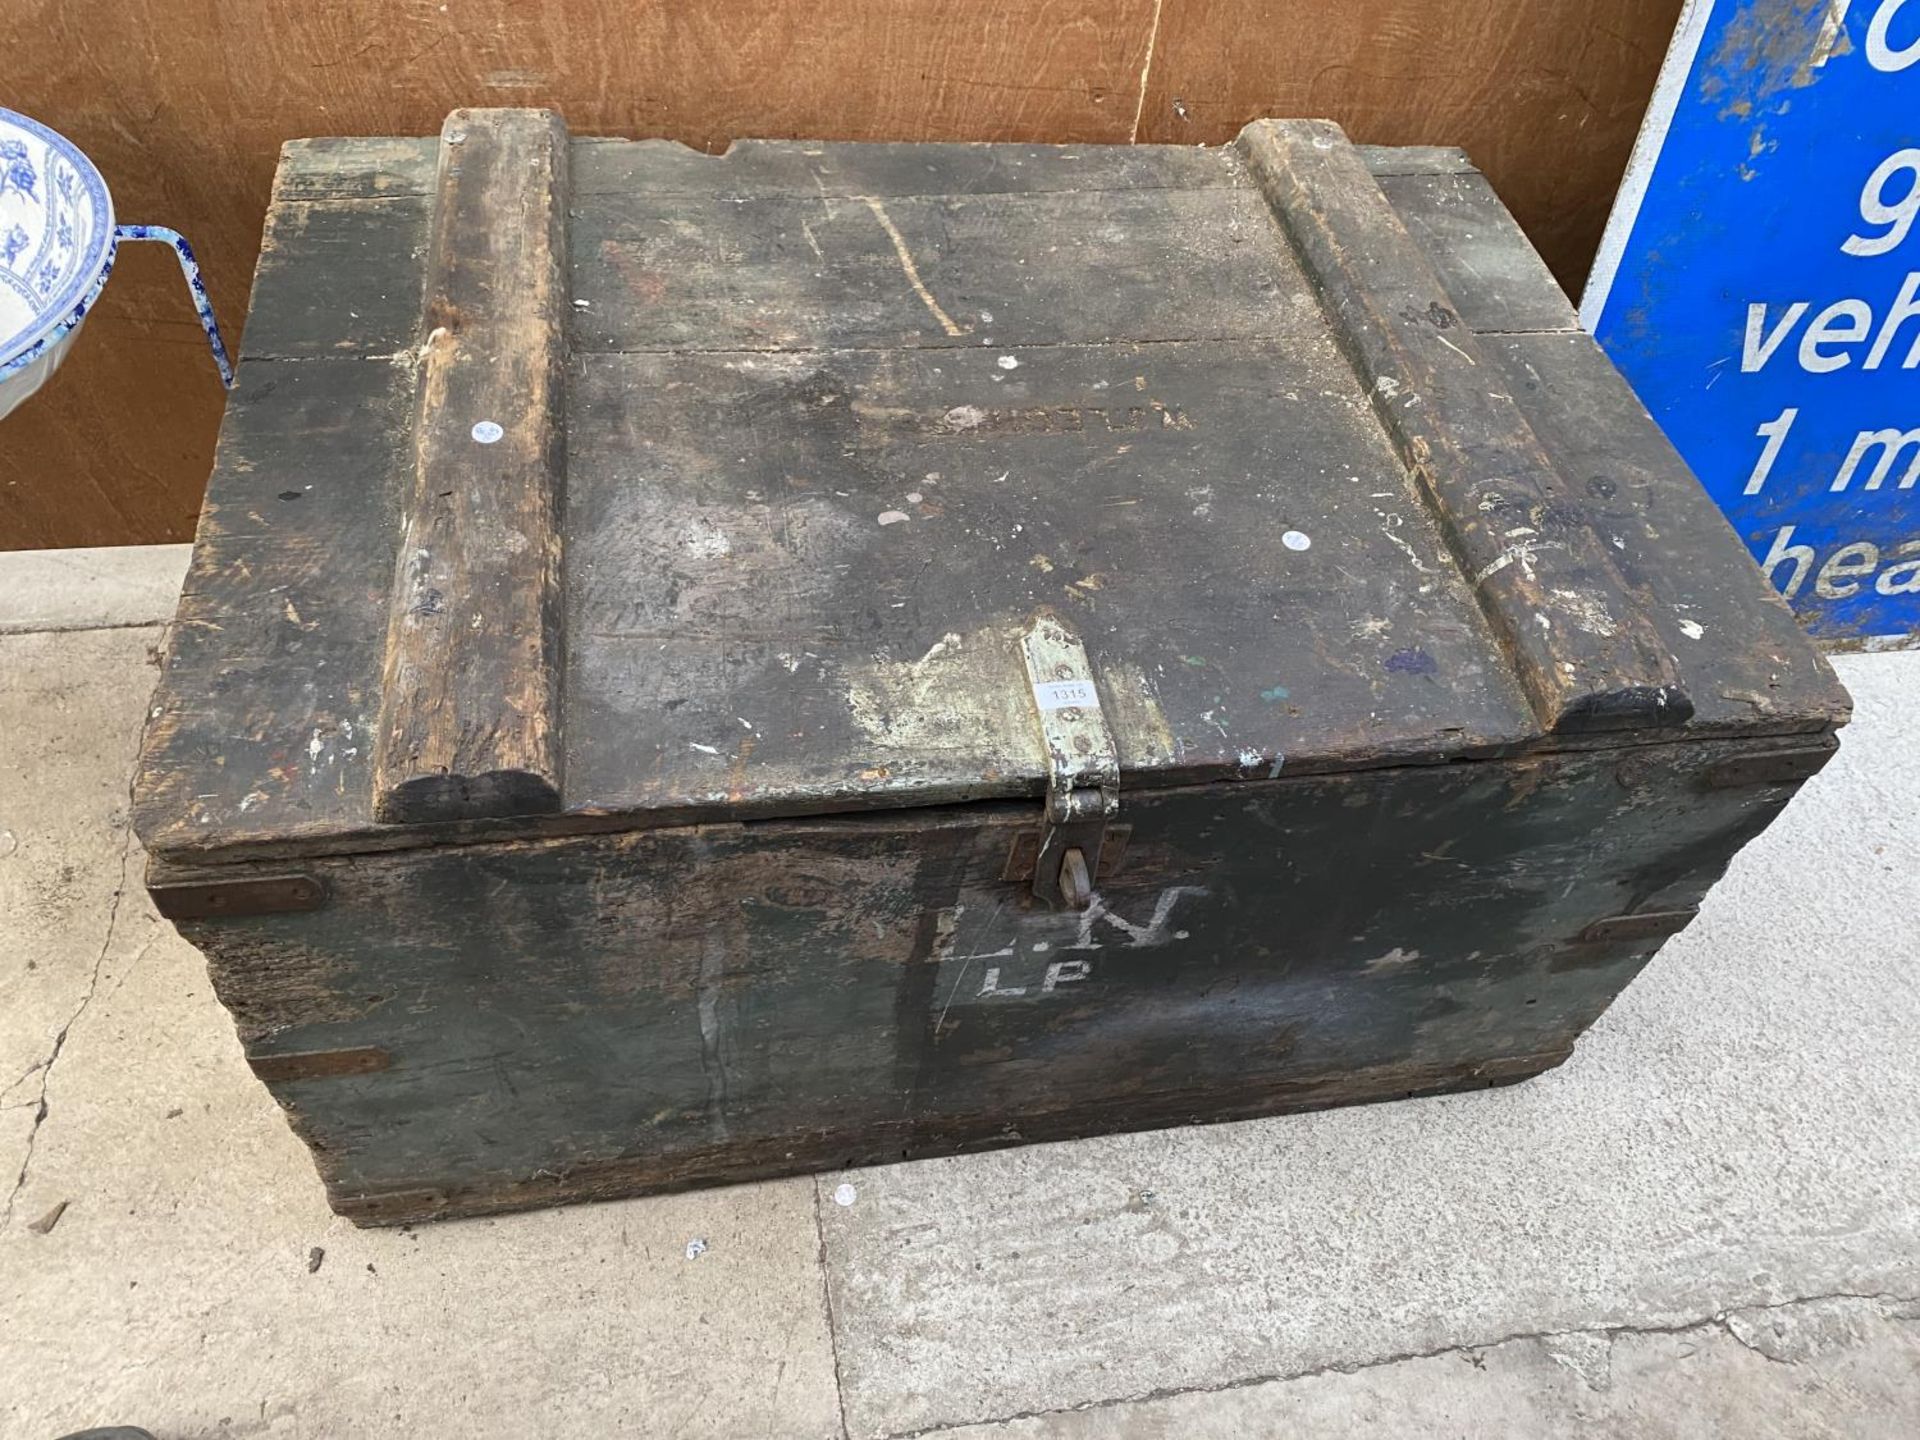 A LARGE VINTAGE WOODEN CHEST WITH METAL BANDING